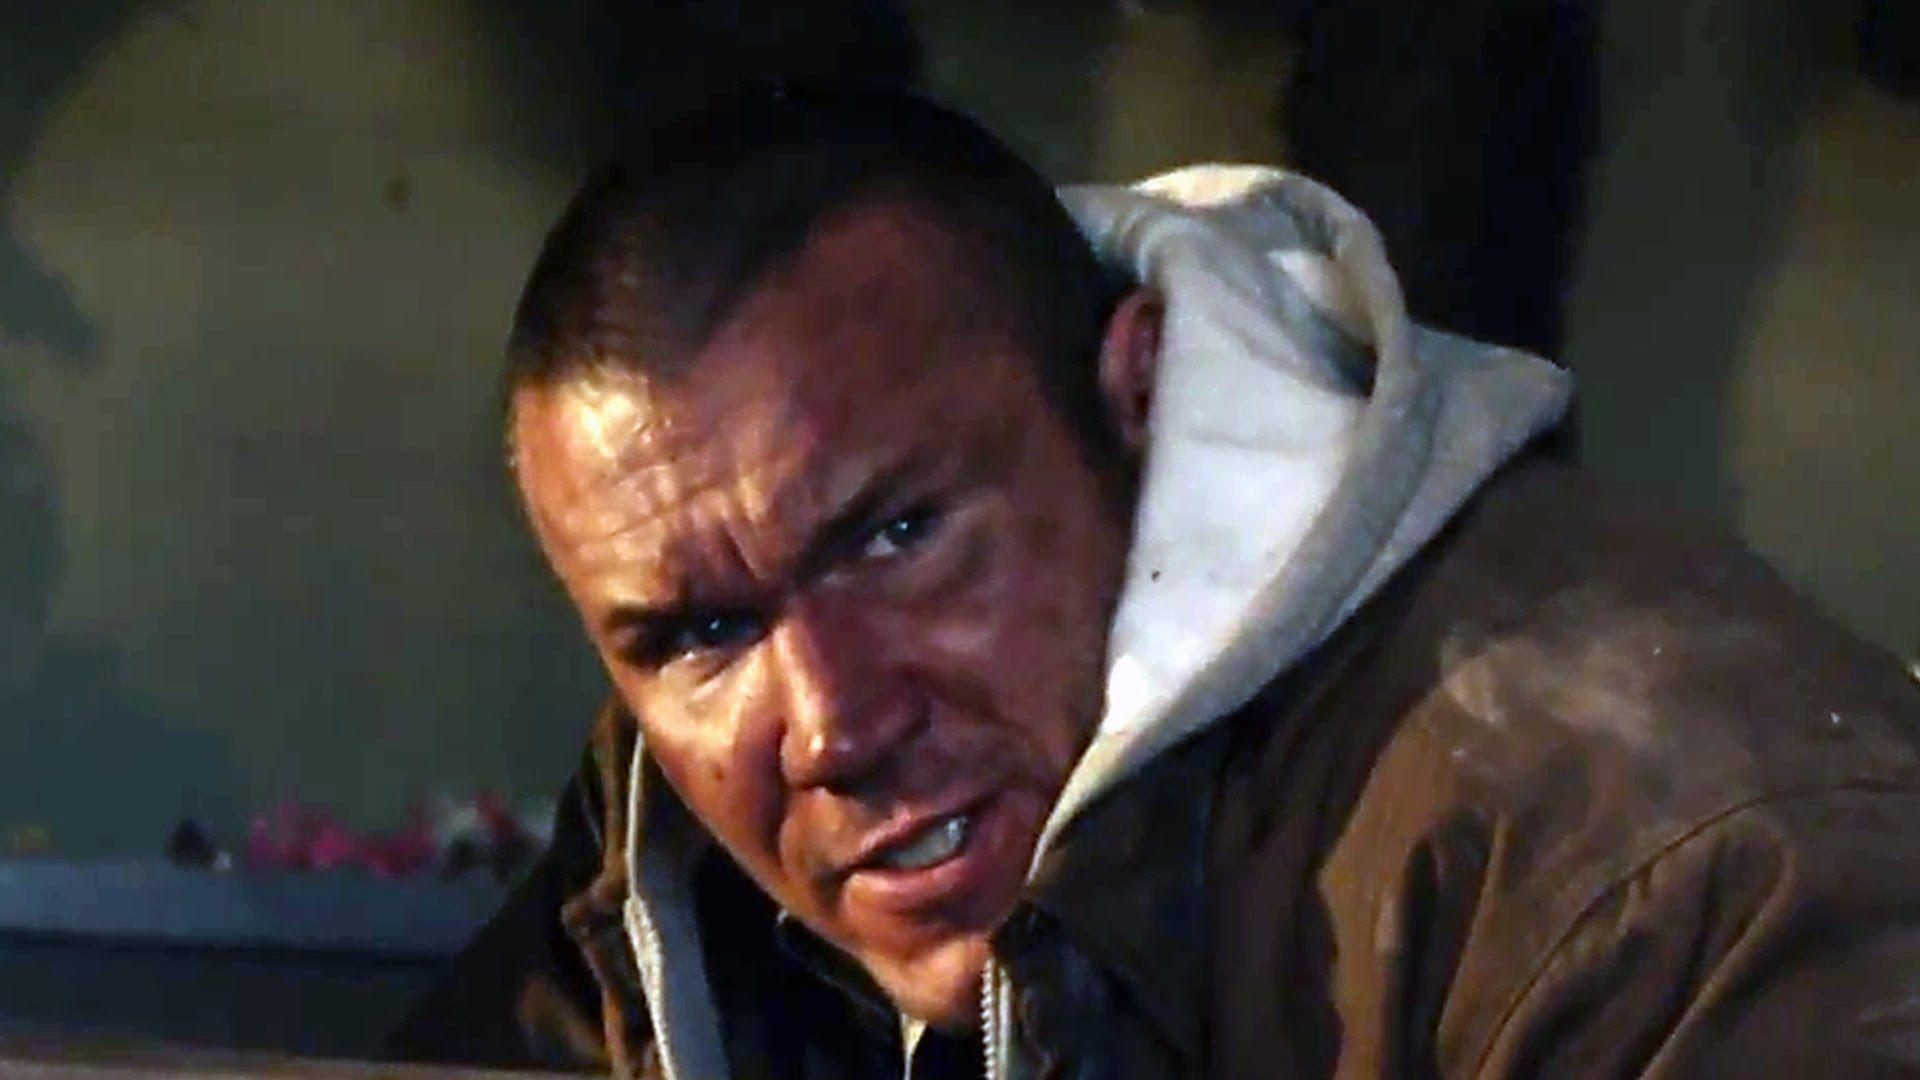 THE CONDEMNED 2 (2015) Randy Orton WWE Action Movie